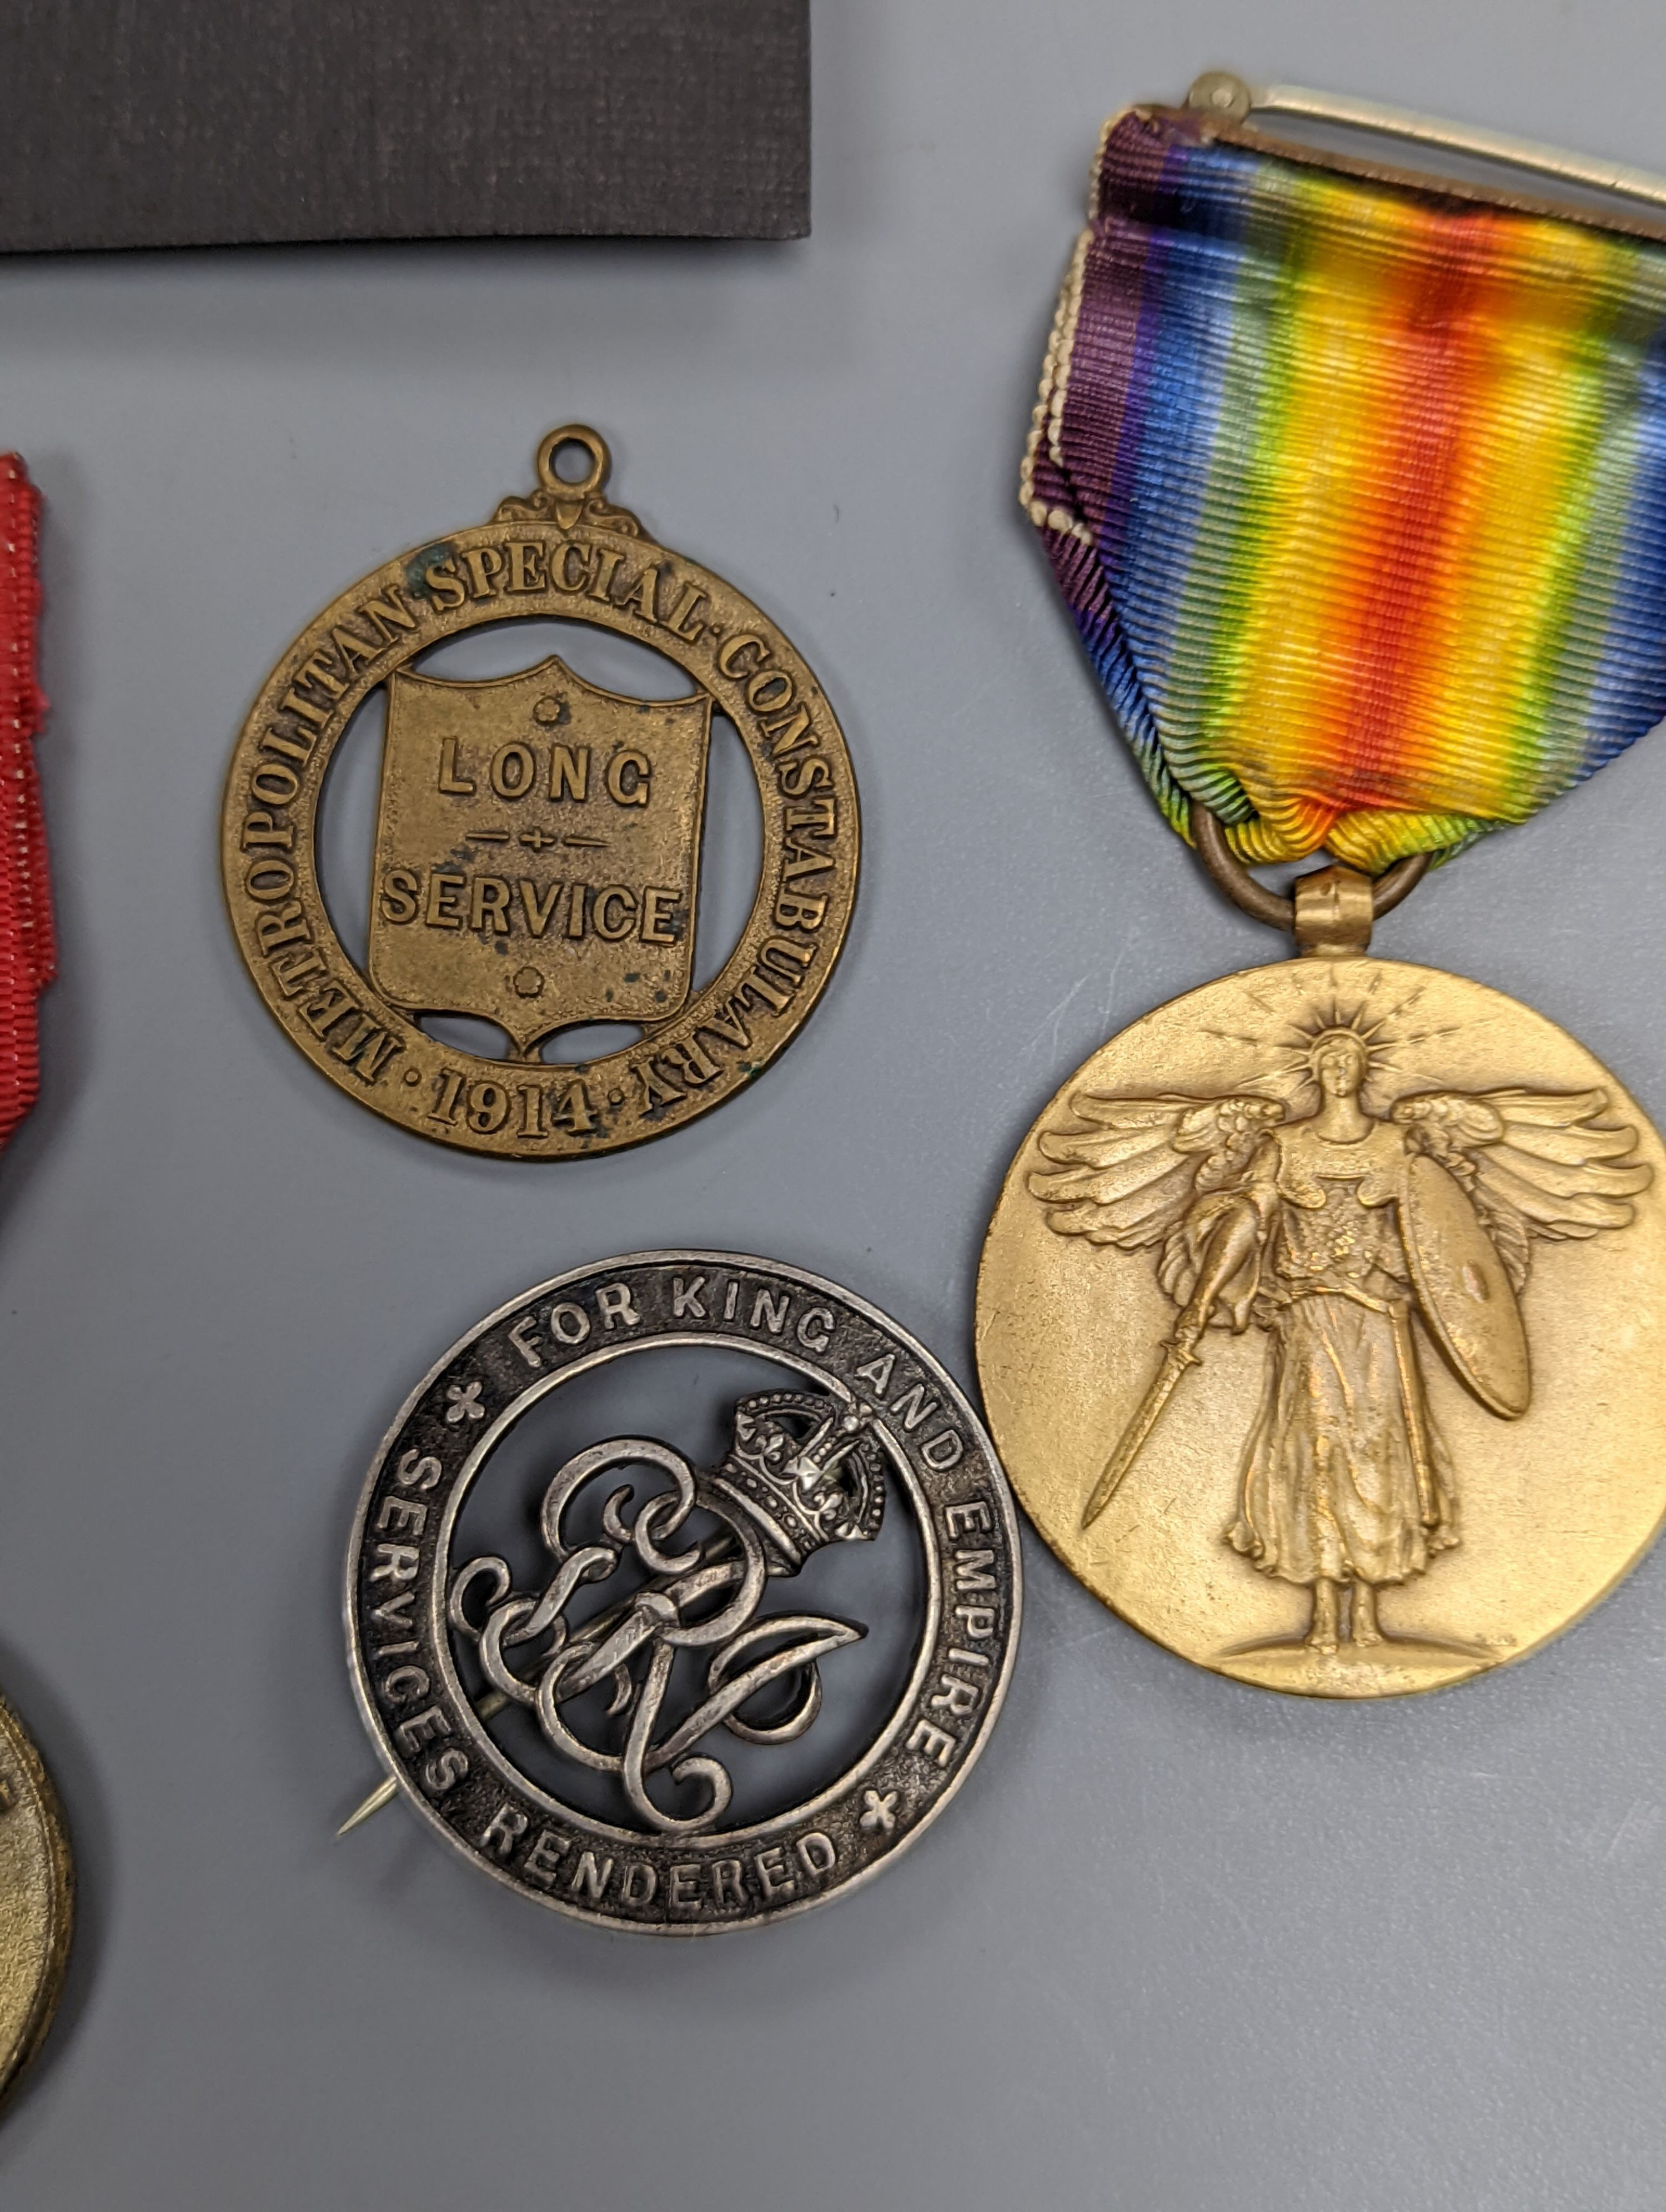 A George VI Territorial For Efficient Service medal, ARP, On War Service, Women’s Land Army badges, UN medal and other badges and medals and a quantity of reference books